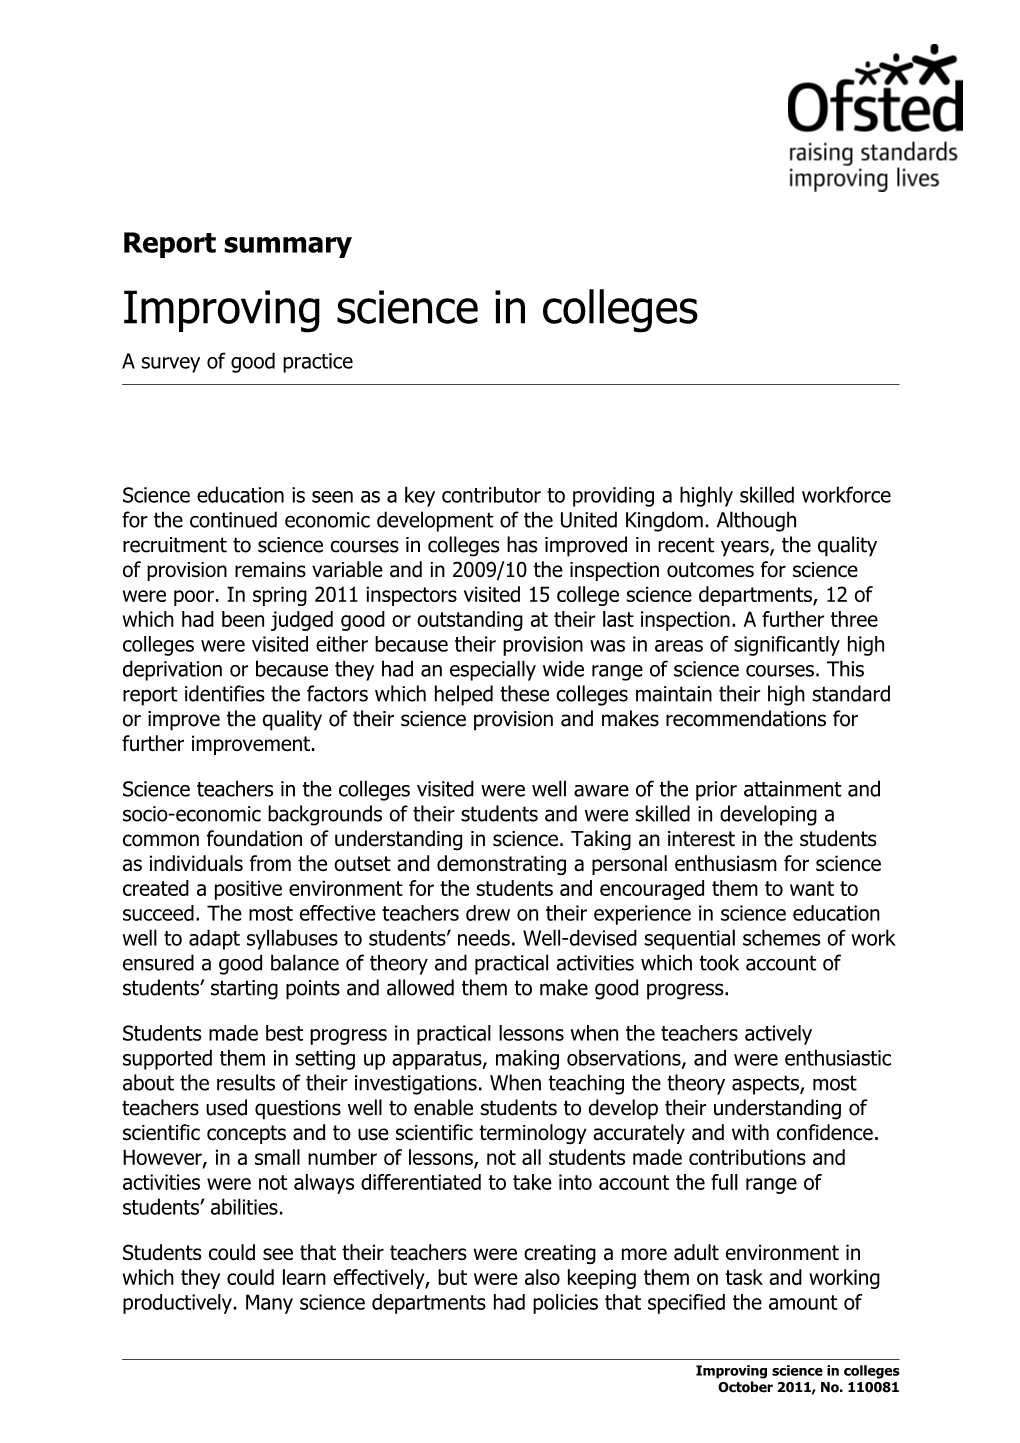 Improving Science in Colleges